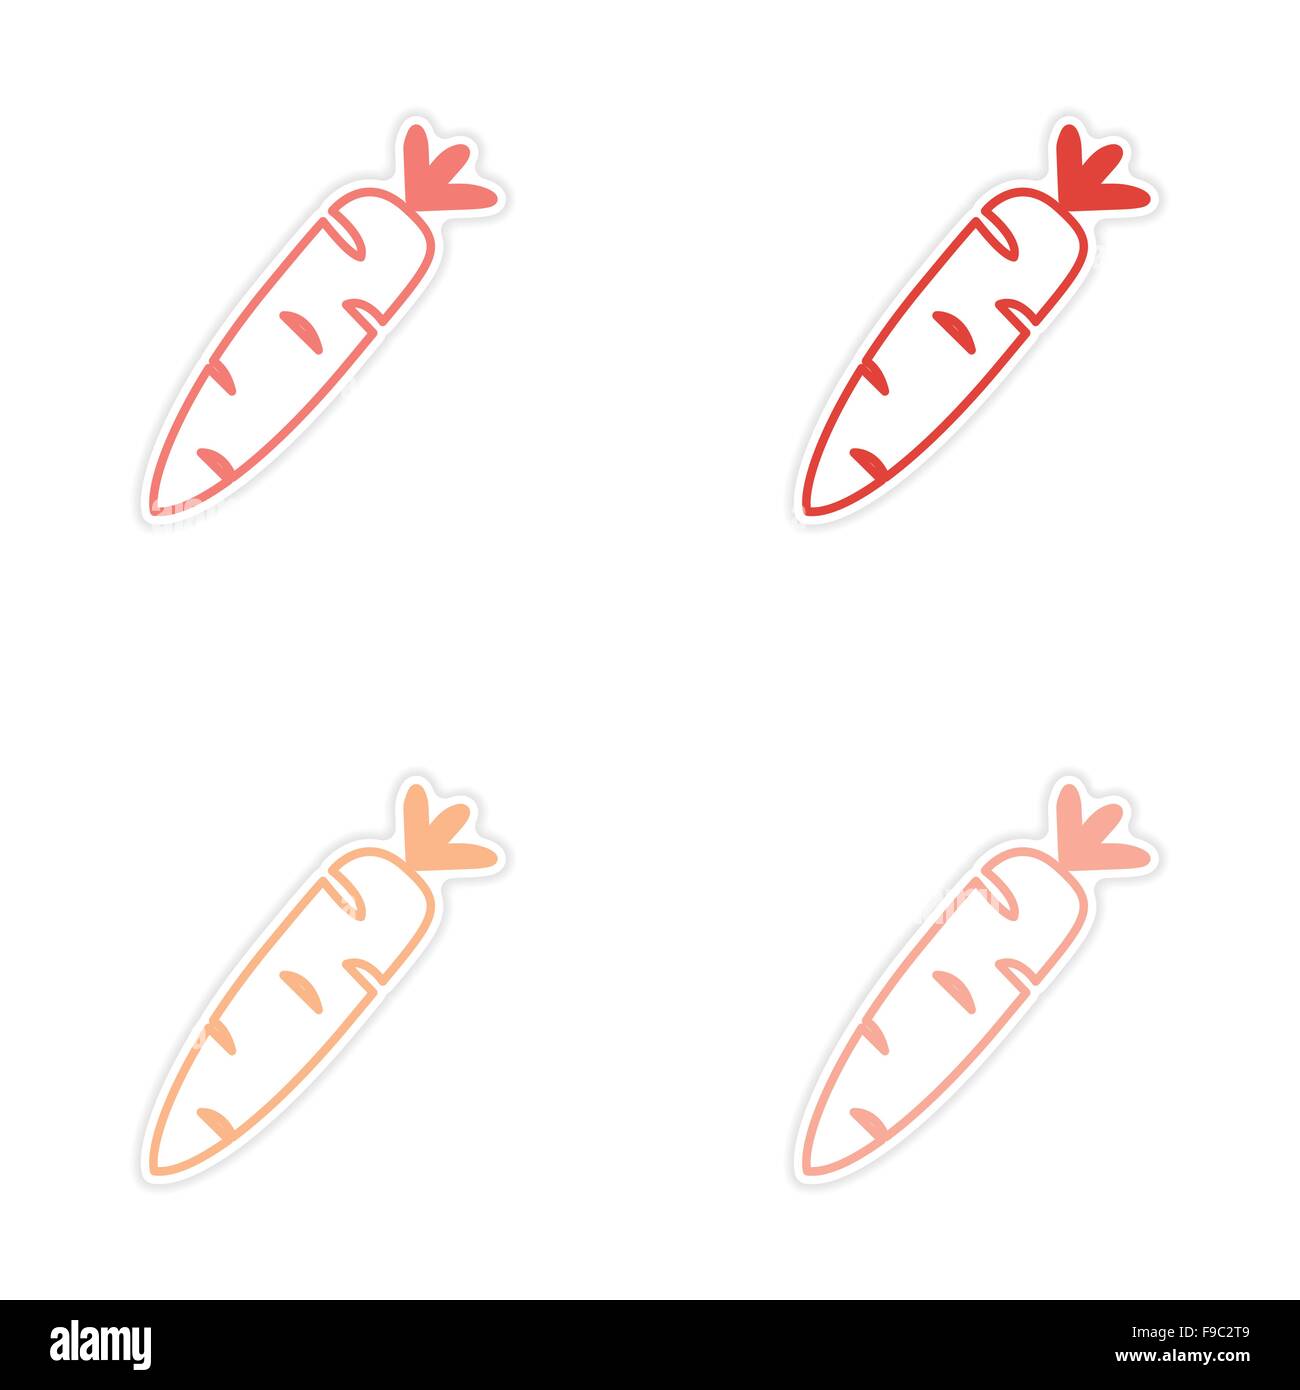 assembly realistic sticker design on paper carrot Stock Vector